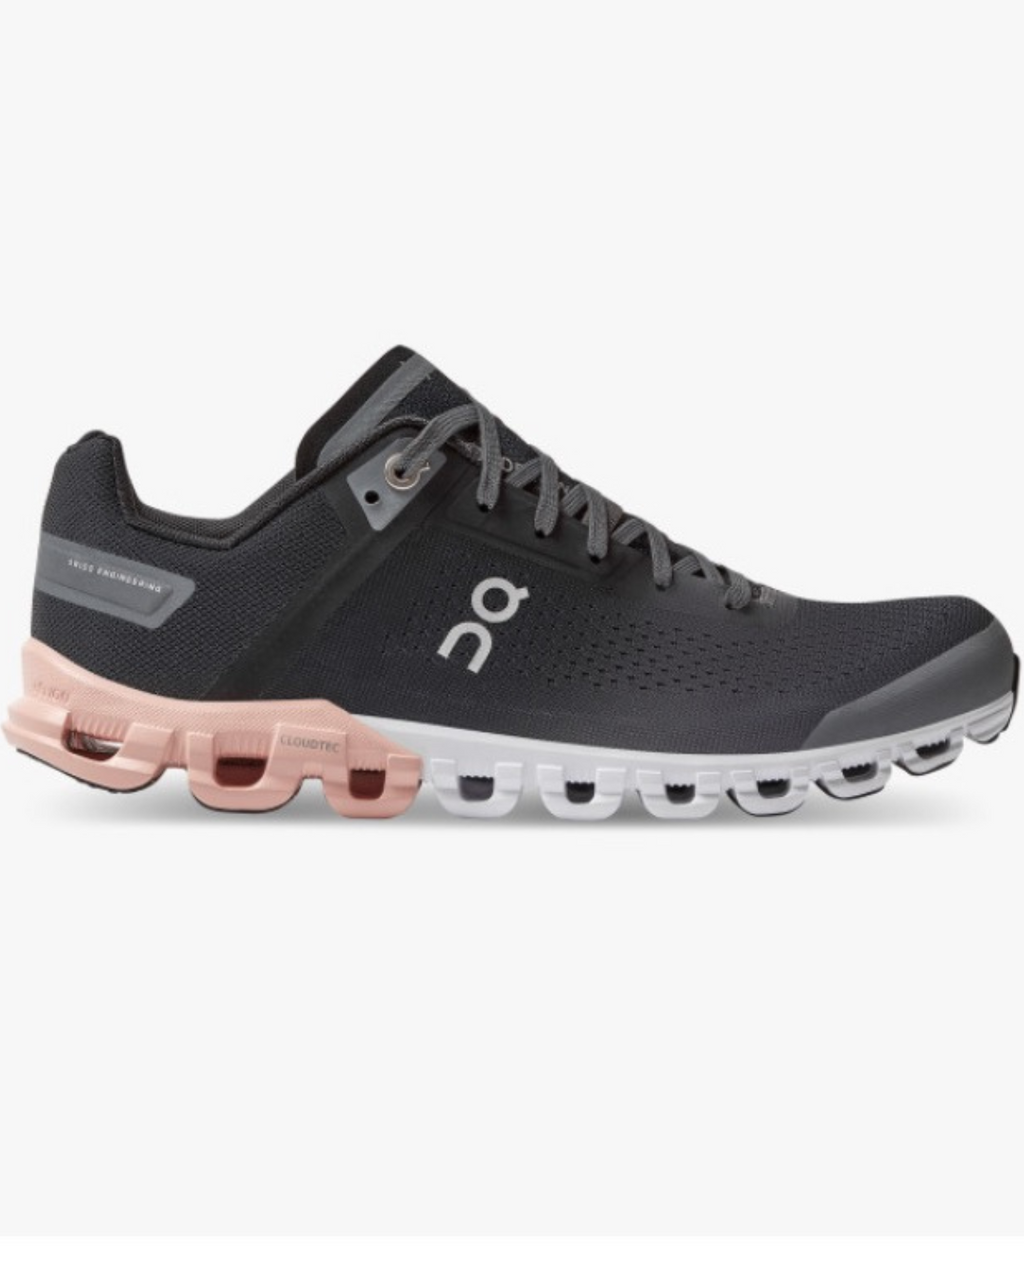 Cloudflow Sneakers - Island Outfitters